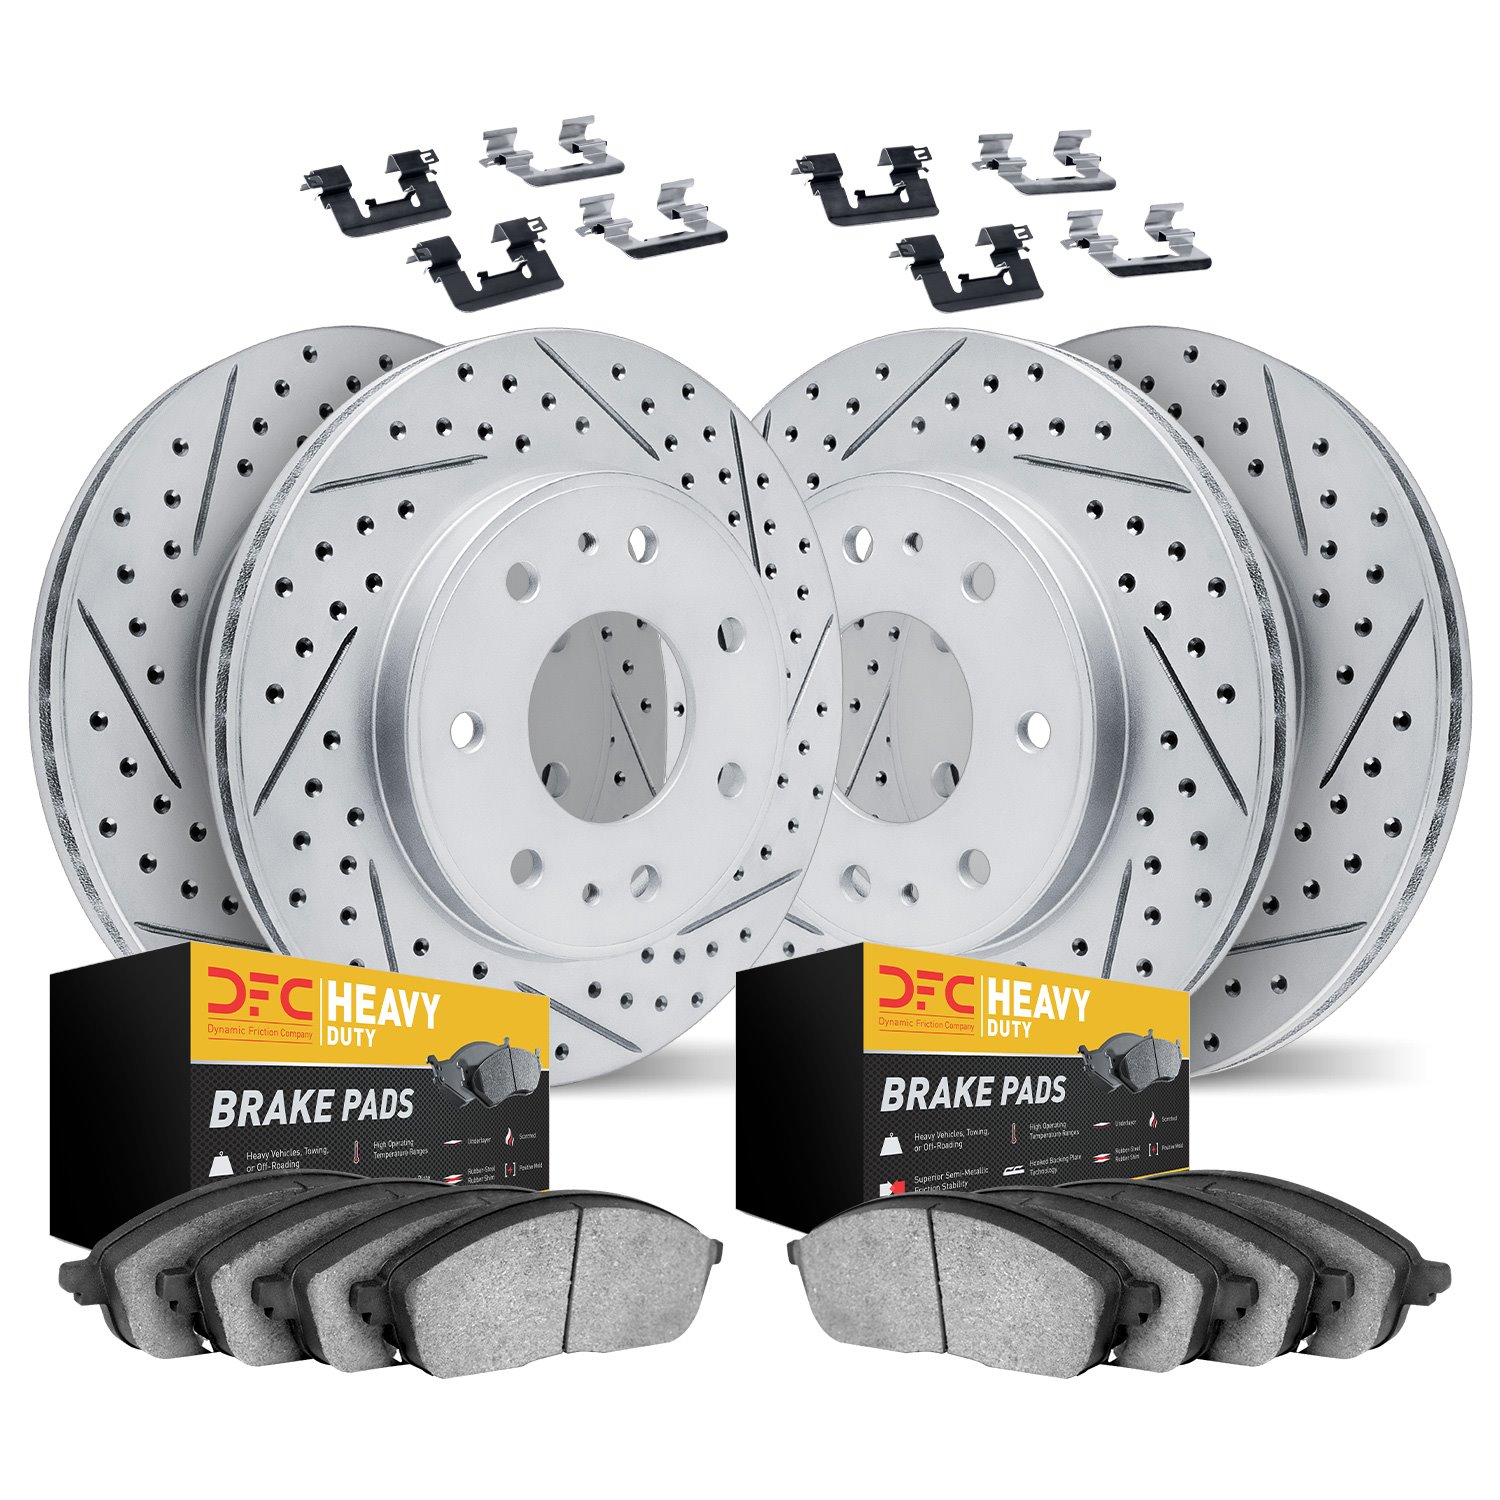 2214-99068 Geoperformance Drilled/Slotted Rotors w/Heavy-Duty Pads Kit & Hardware, 2004-2008 Ford/Lincoln/Mercury/Mazda, Positio